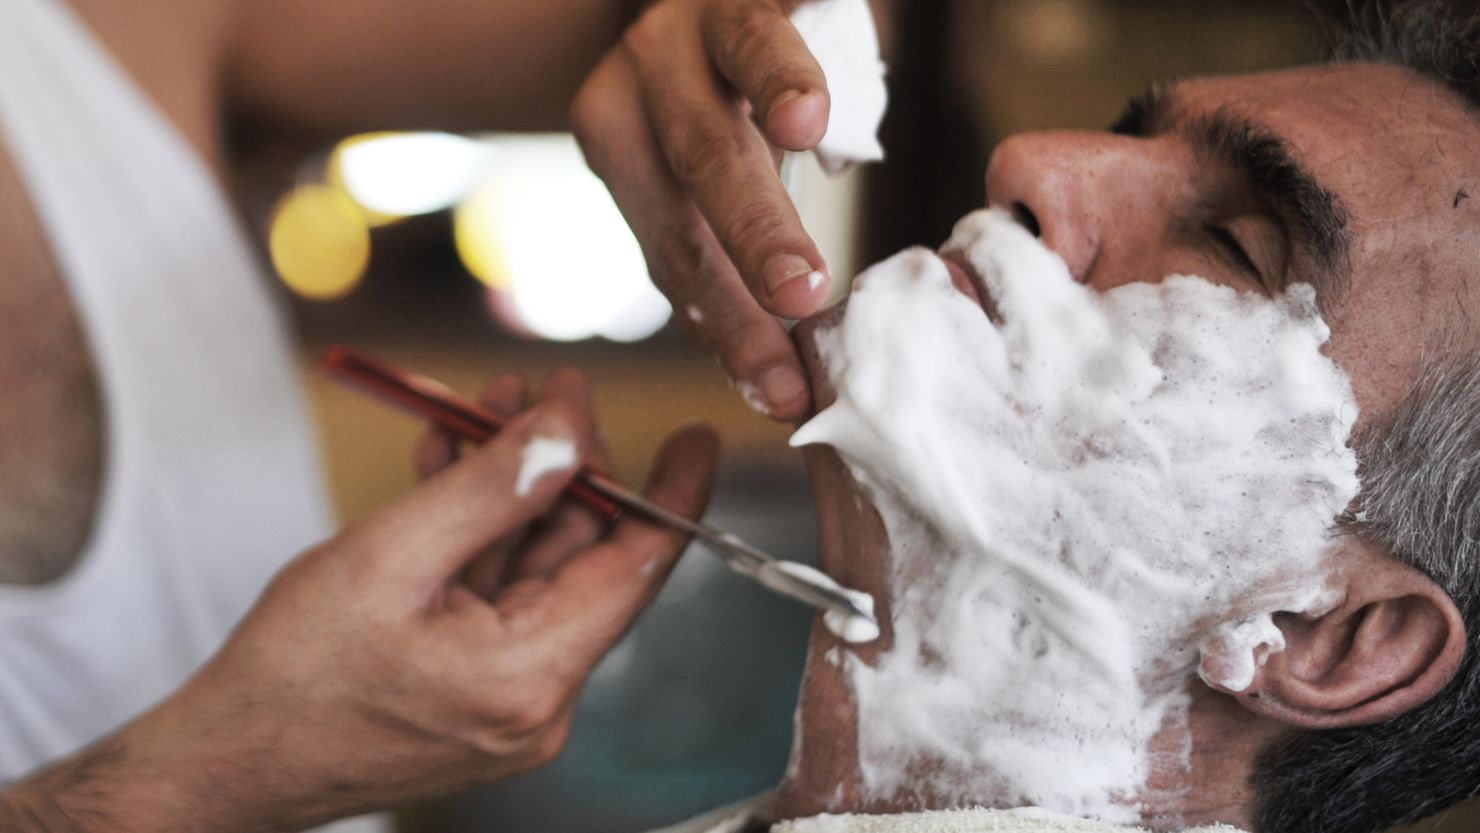 The Turkish grooming process isn't just about shaving.